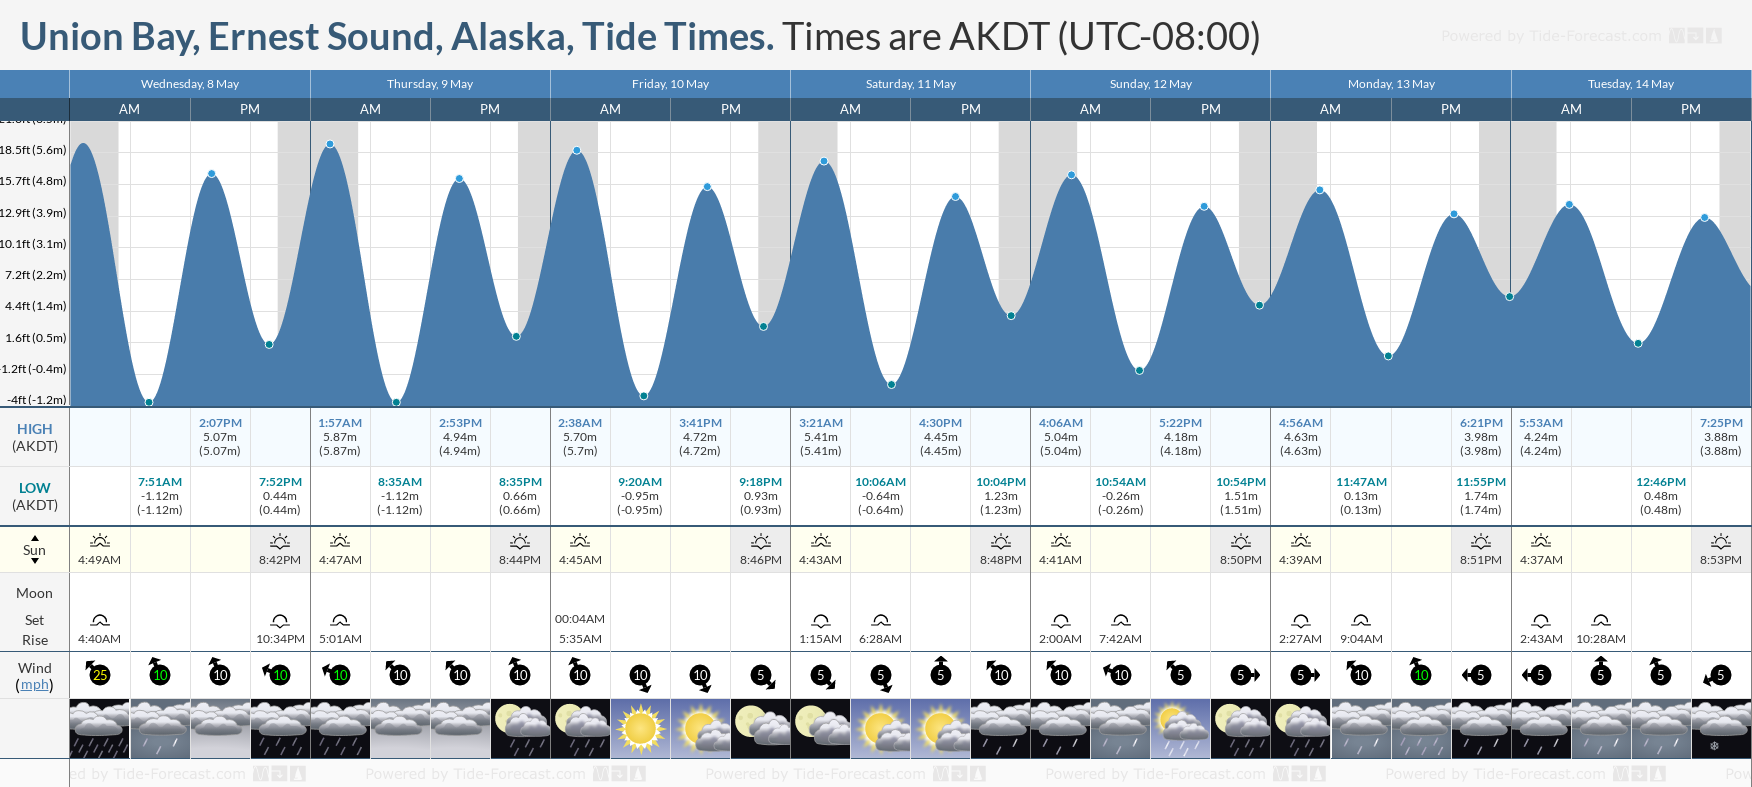 Union Bay, Ernest Sound, Alaska Tide Chart including high and low tide tide times for the next 7 days